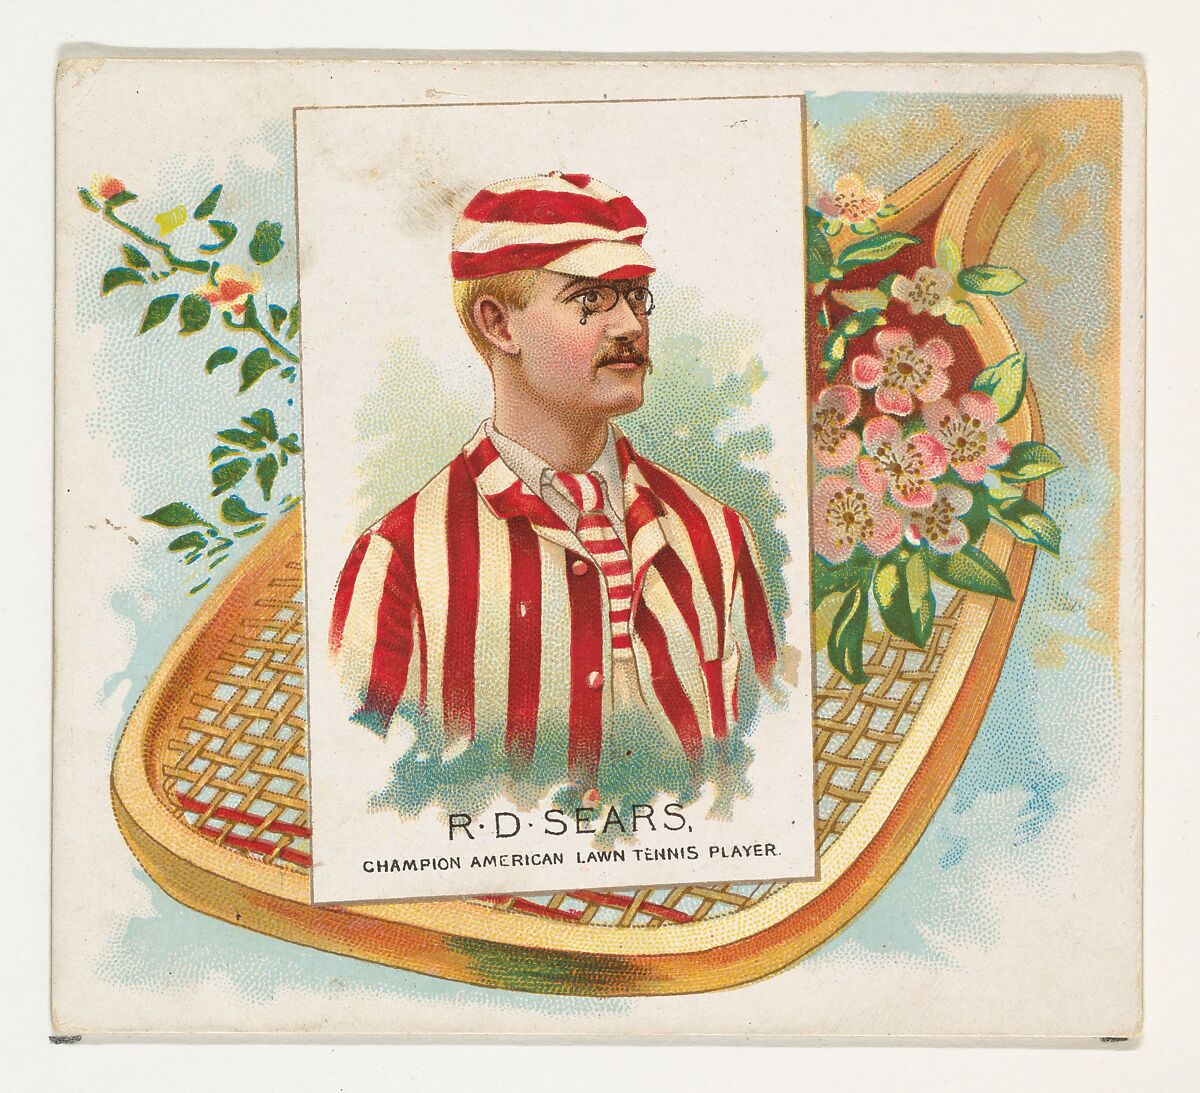 R.D. Sears, Champion American Lawn Tennis Player, from World's Champions, Second Series (N43) for Allen & Ginter Cigarettes, Allen &amp; Ginter (American, Richmond, Virginia), Commercial lithograph 